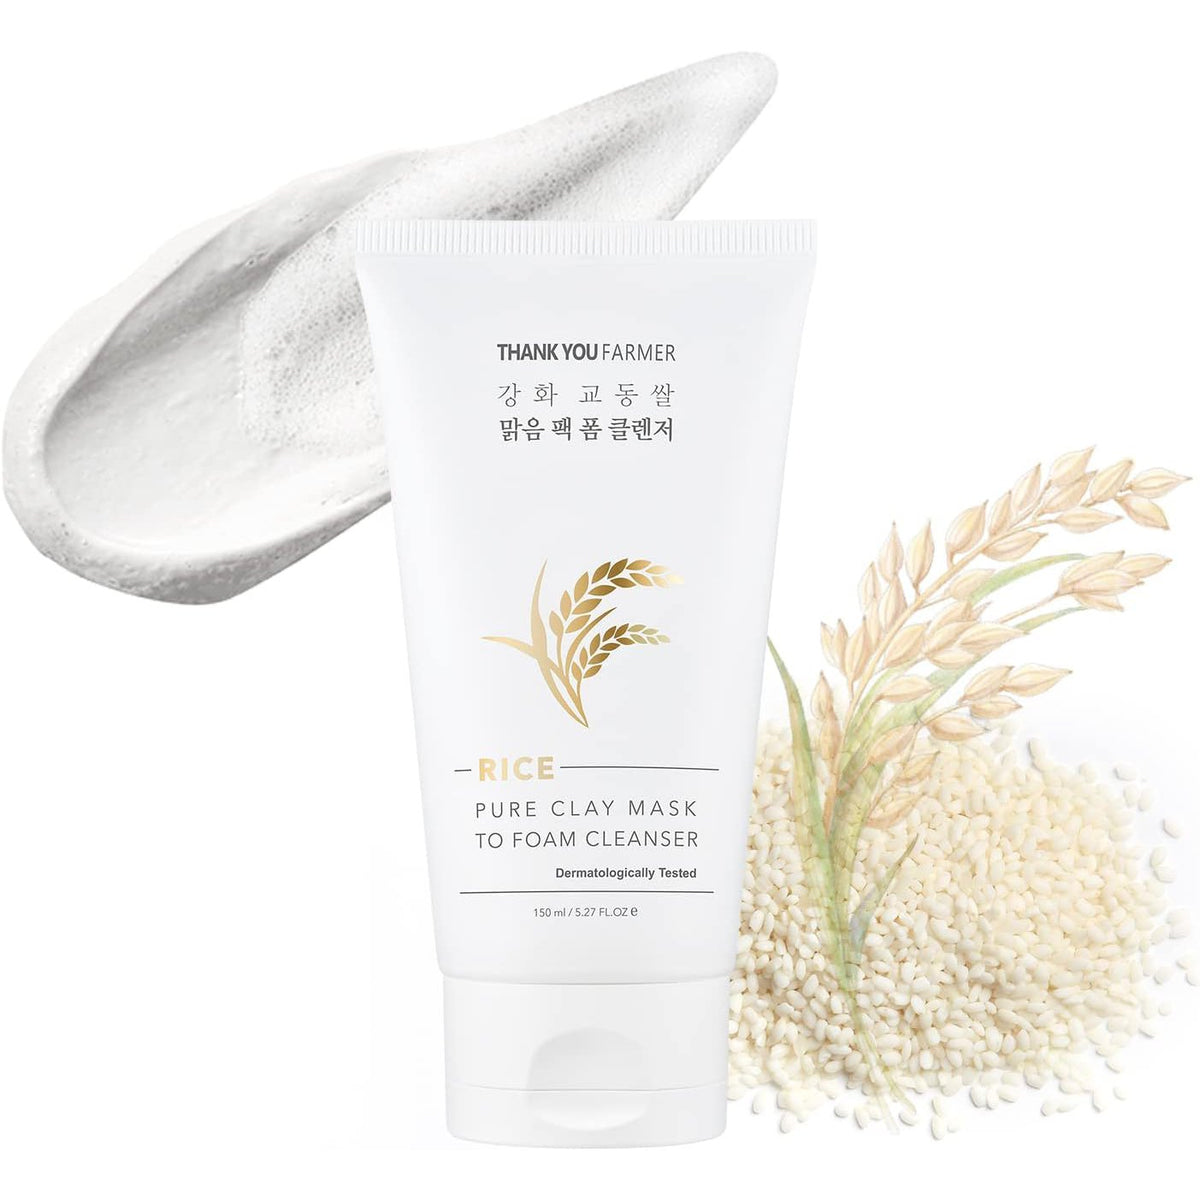 Rice Pure Clay Mask to Foam Cleanser Thank You Farmer